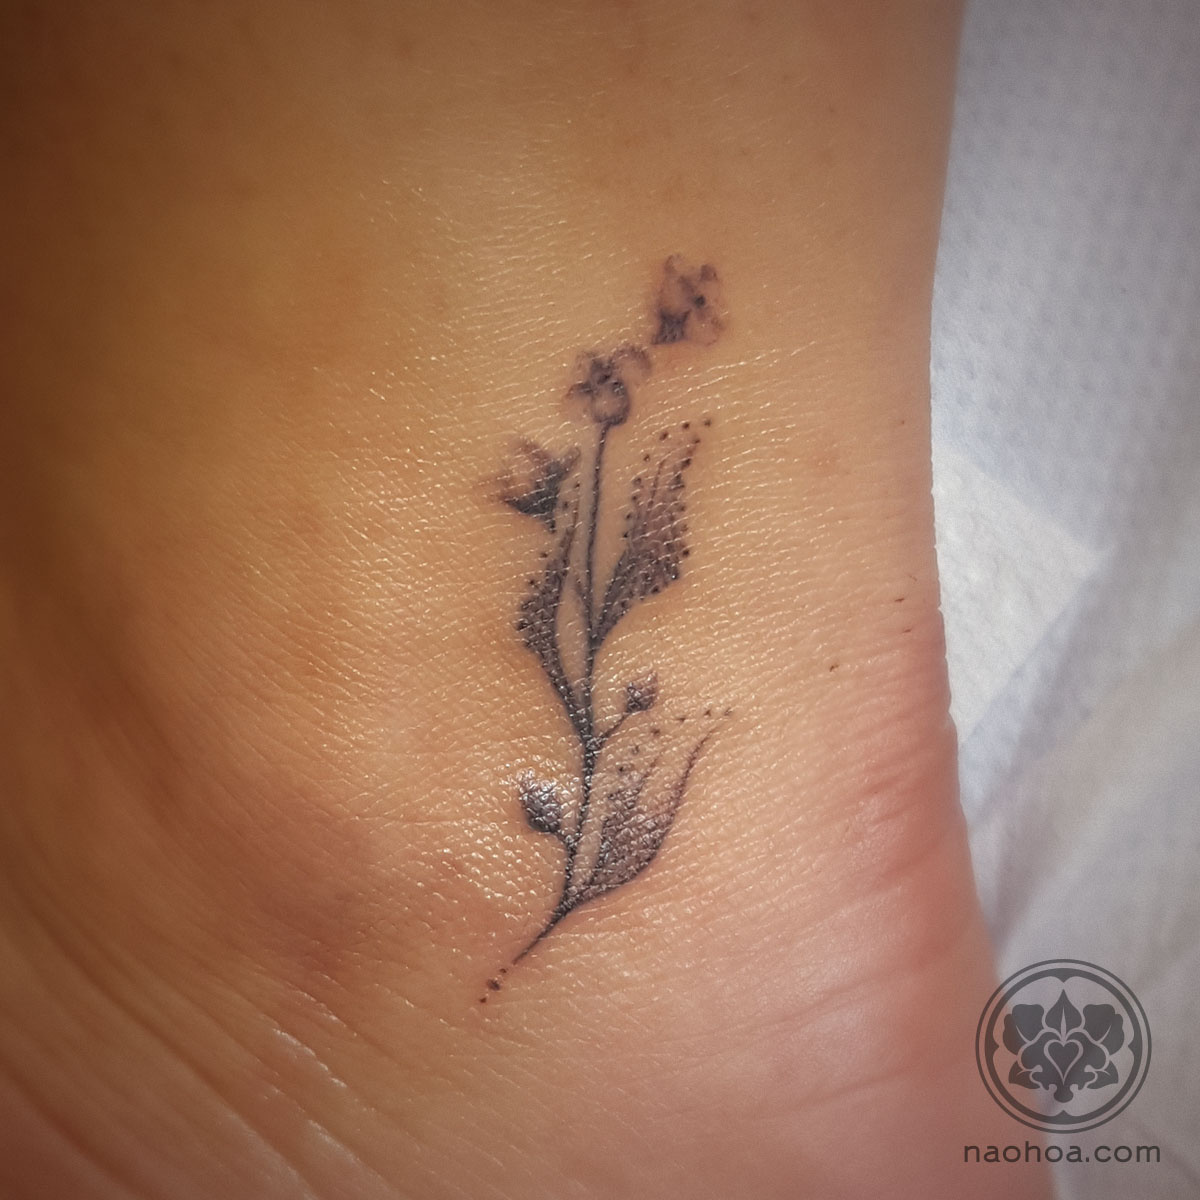 A delicate, feminine tattoo of forget-me-not flowers on a woman's ankle to symbolise each member of her family. Designed and tattooed by Naomi Hoang at NAOHOA Luxury Bespoke Tattoos, Cardiff (Wales, UK).